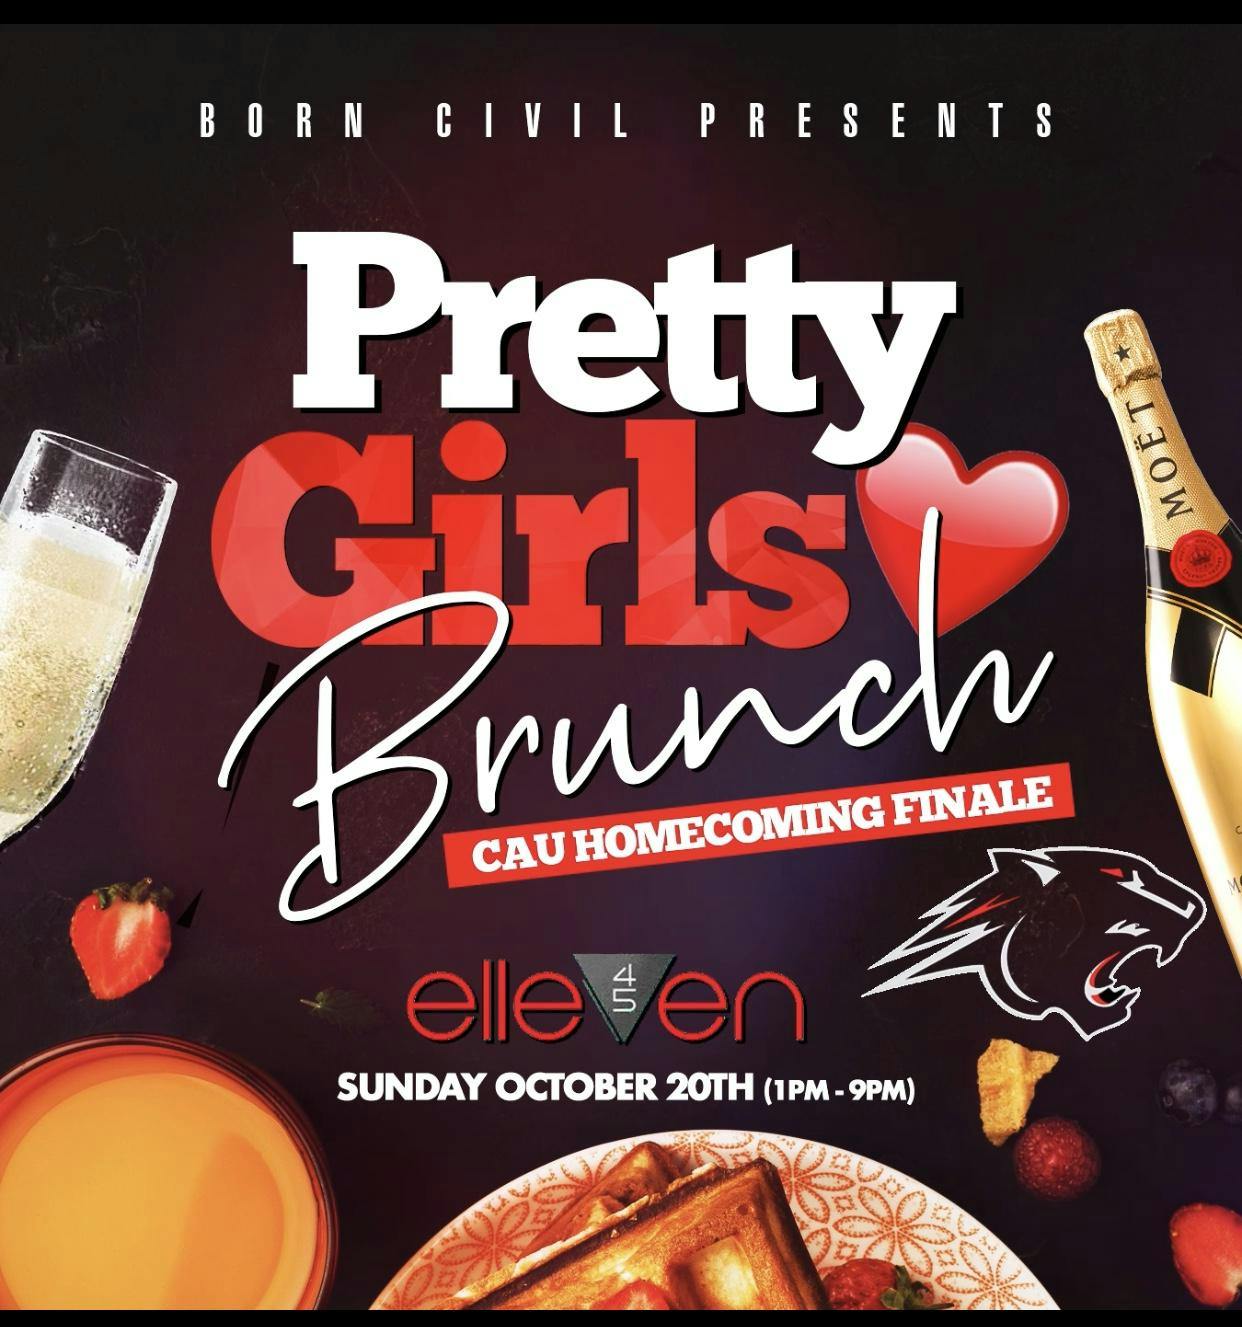  Brunch Club ATL - CAU HOMECOMING FINALE -Hosted by Fly Guy DC